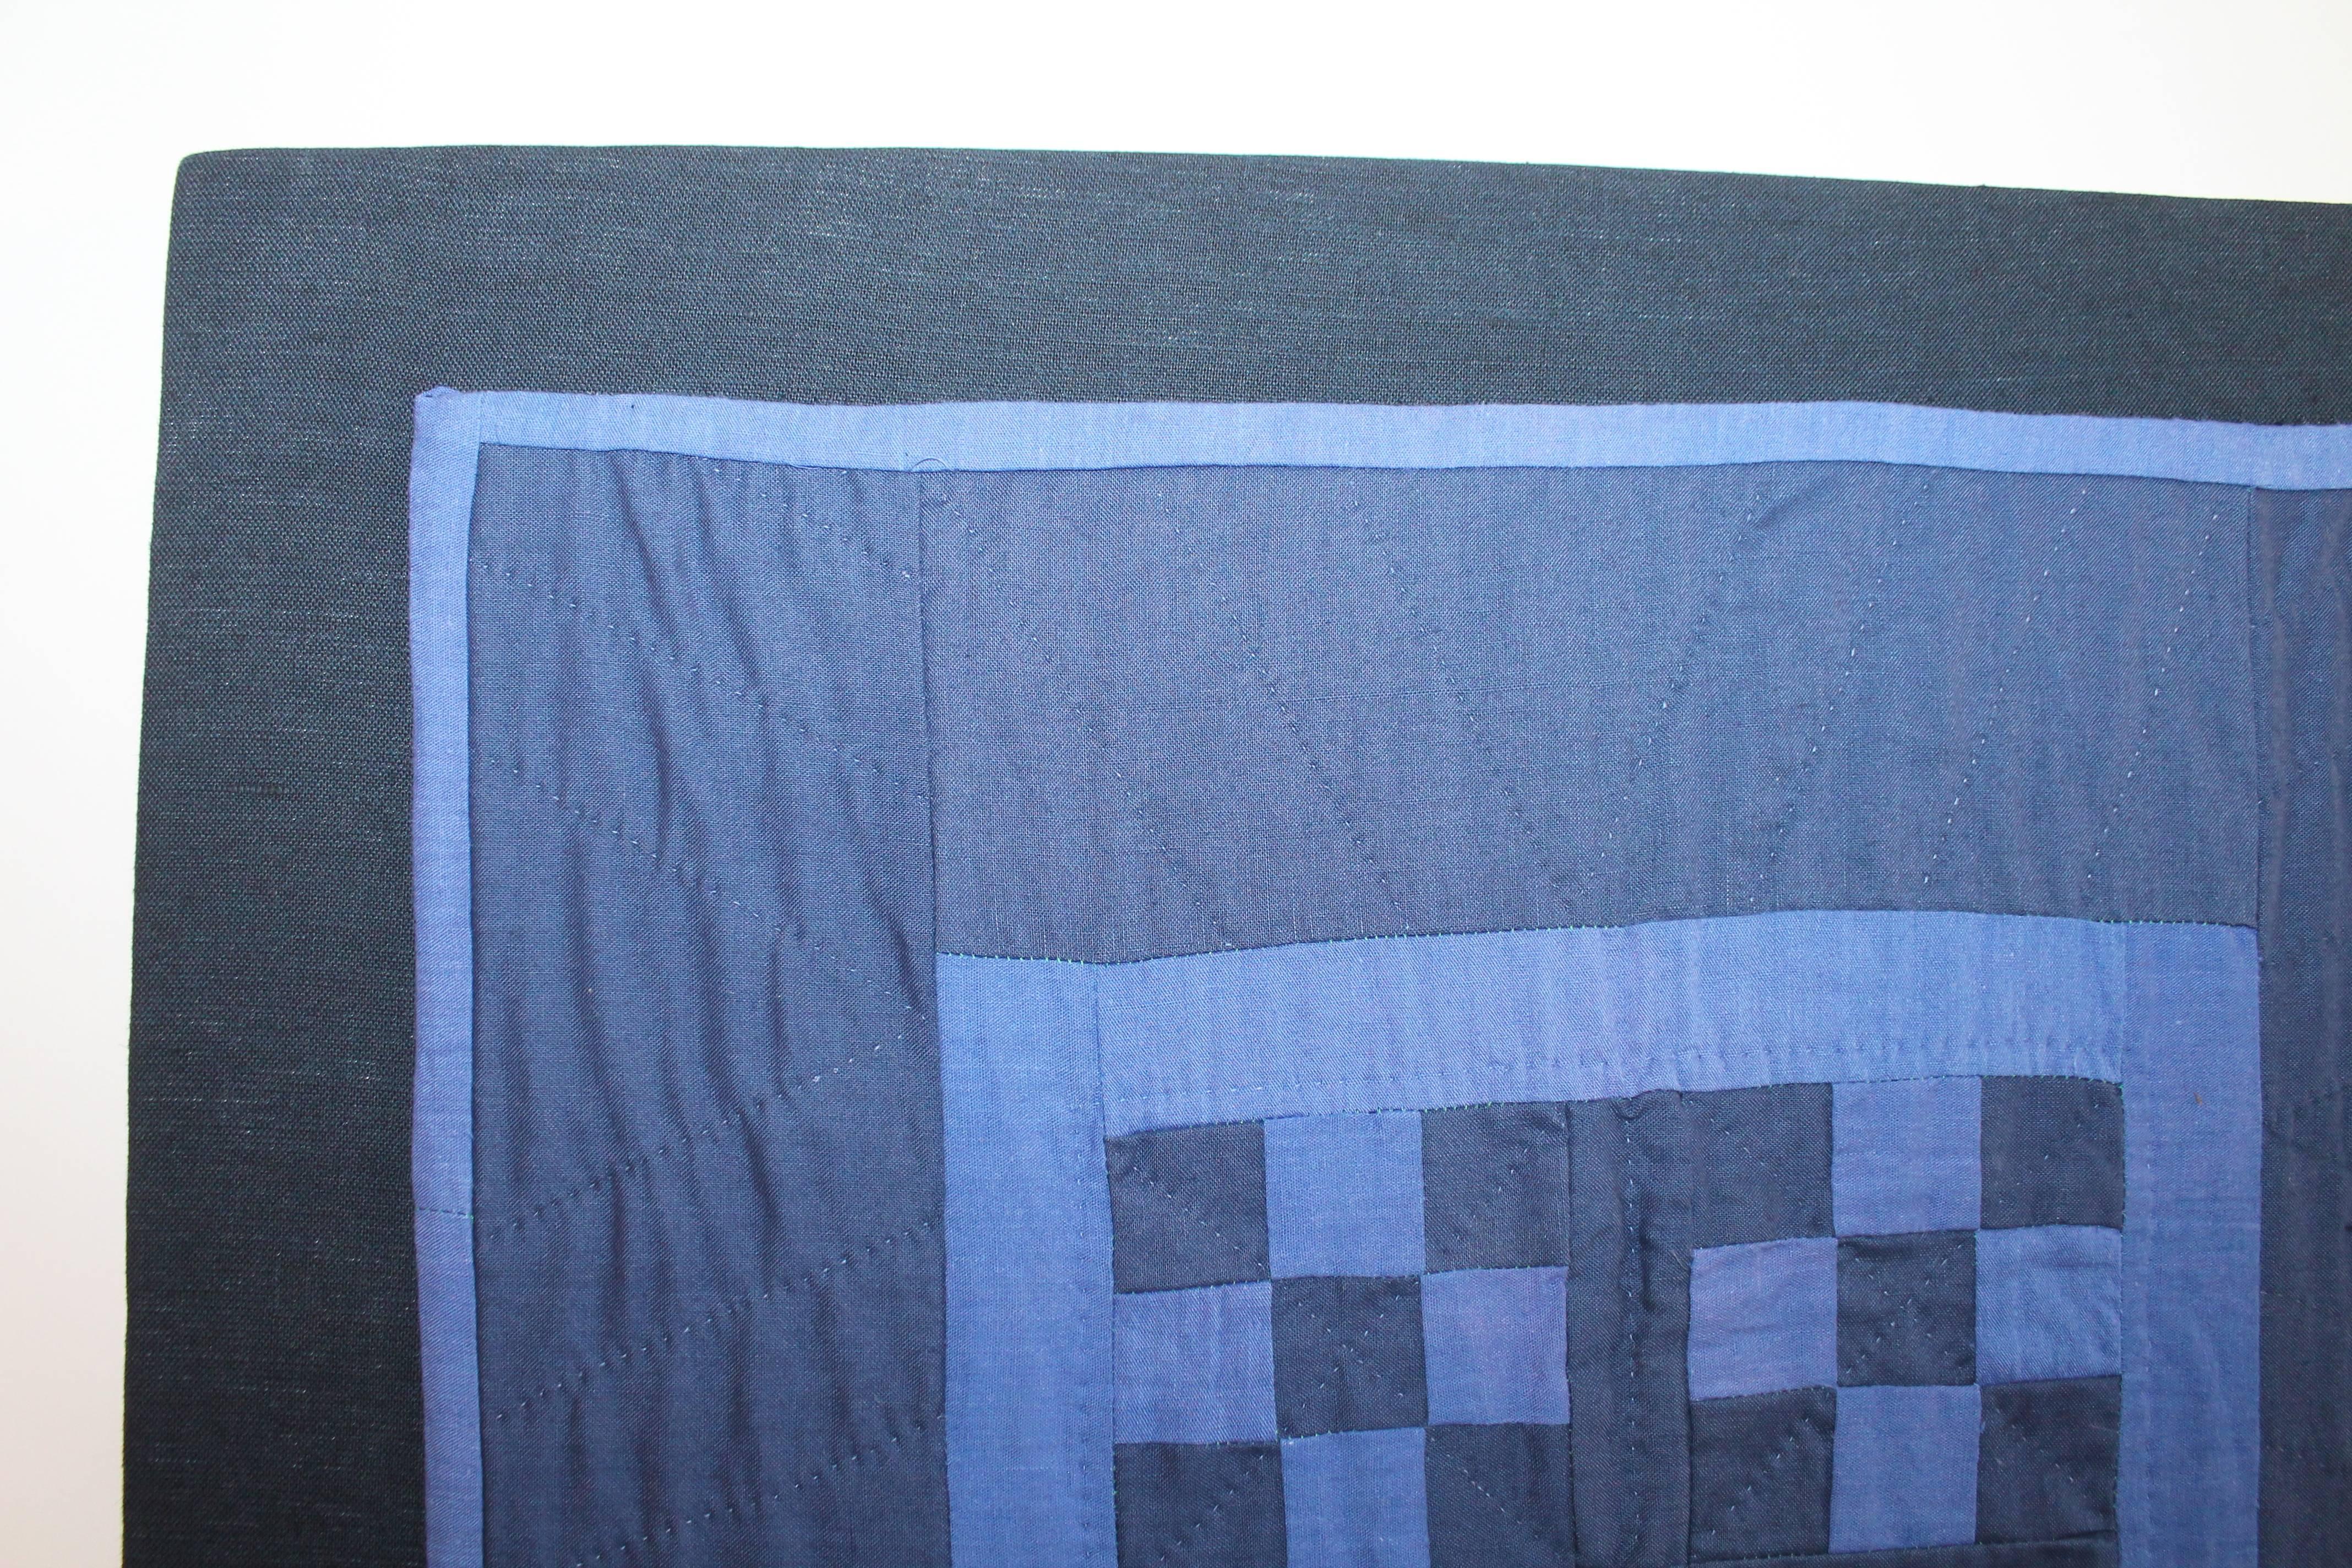 This most unusual deep royal blue back round with a robin egg blue chain in cotton. This Ohio Amish crib quilt is in fine condition and is mounted on a stretcher frame ready for hanging. Great piece of work and colors.